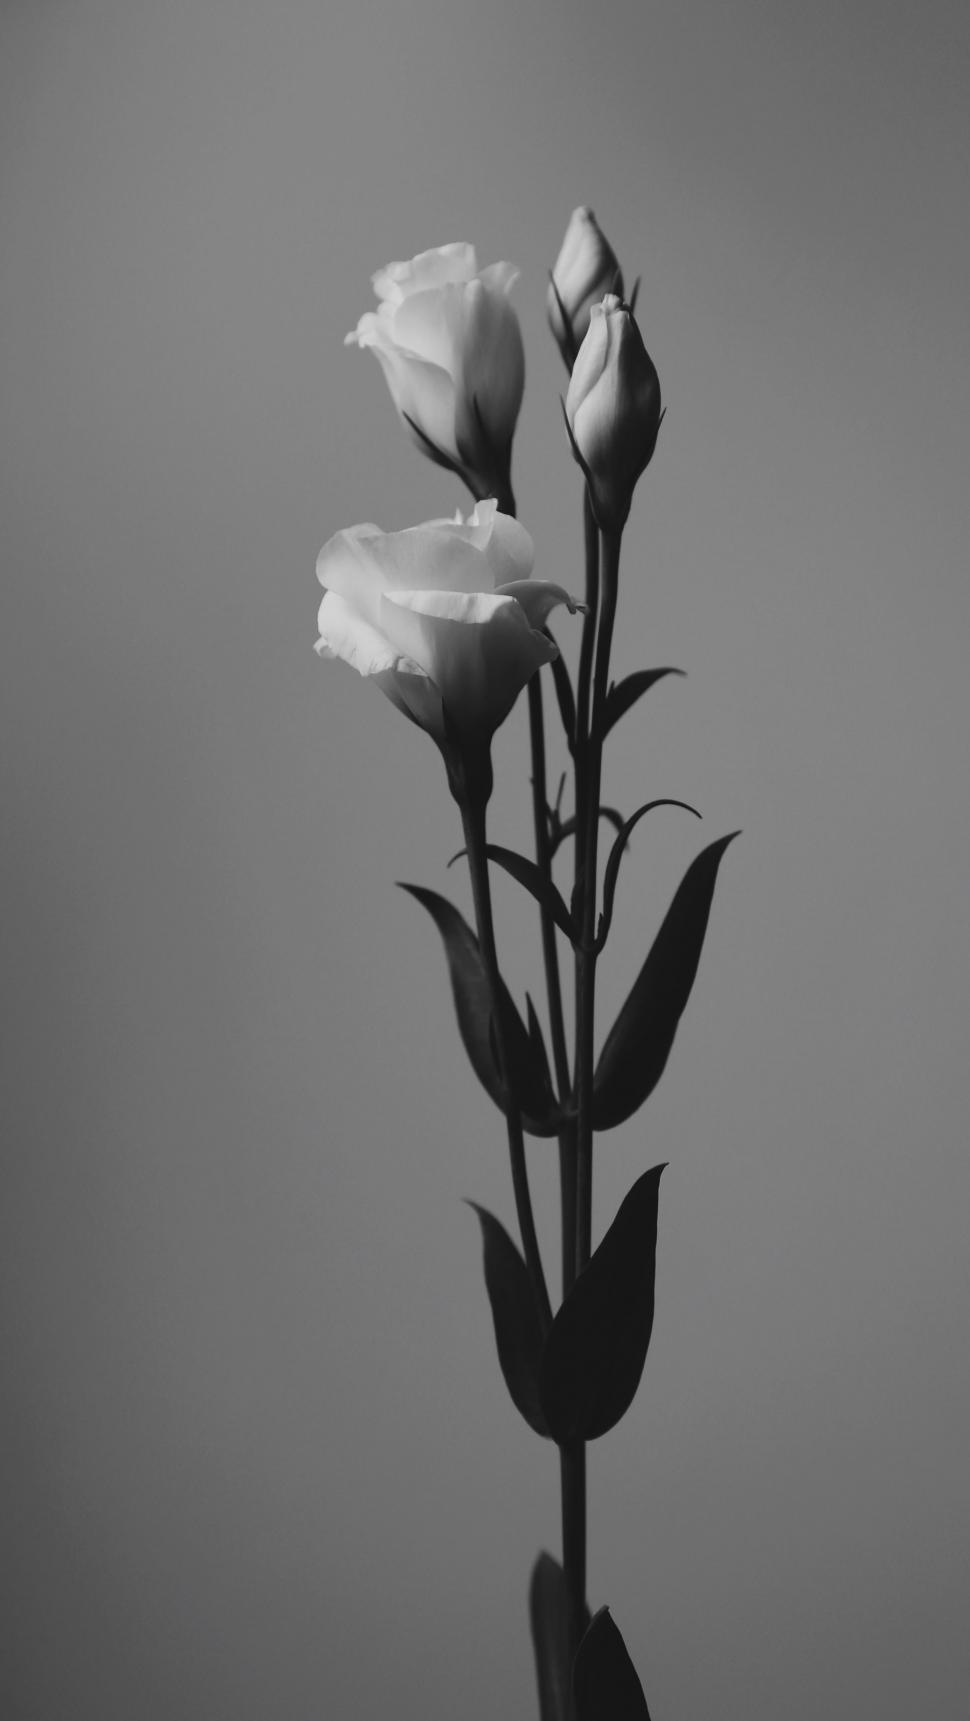 Free Image of Tulip Flowers with leave  